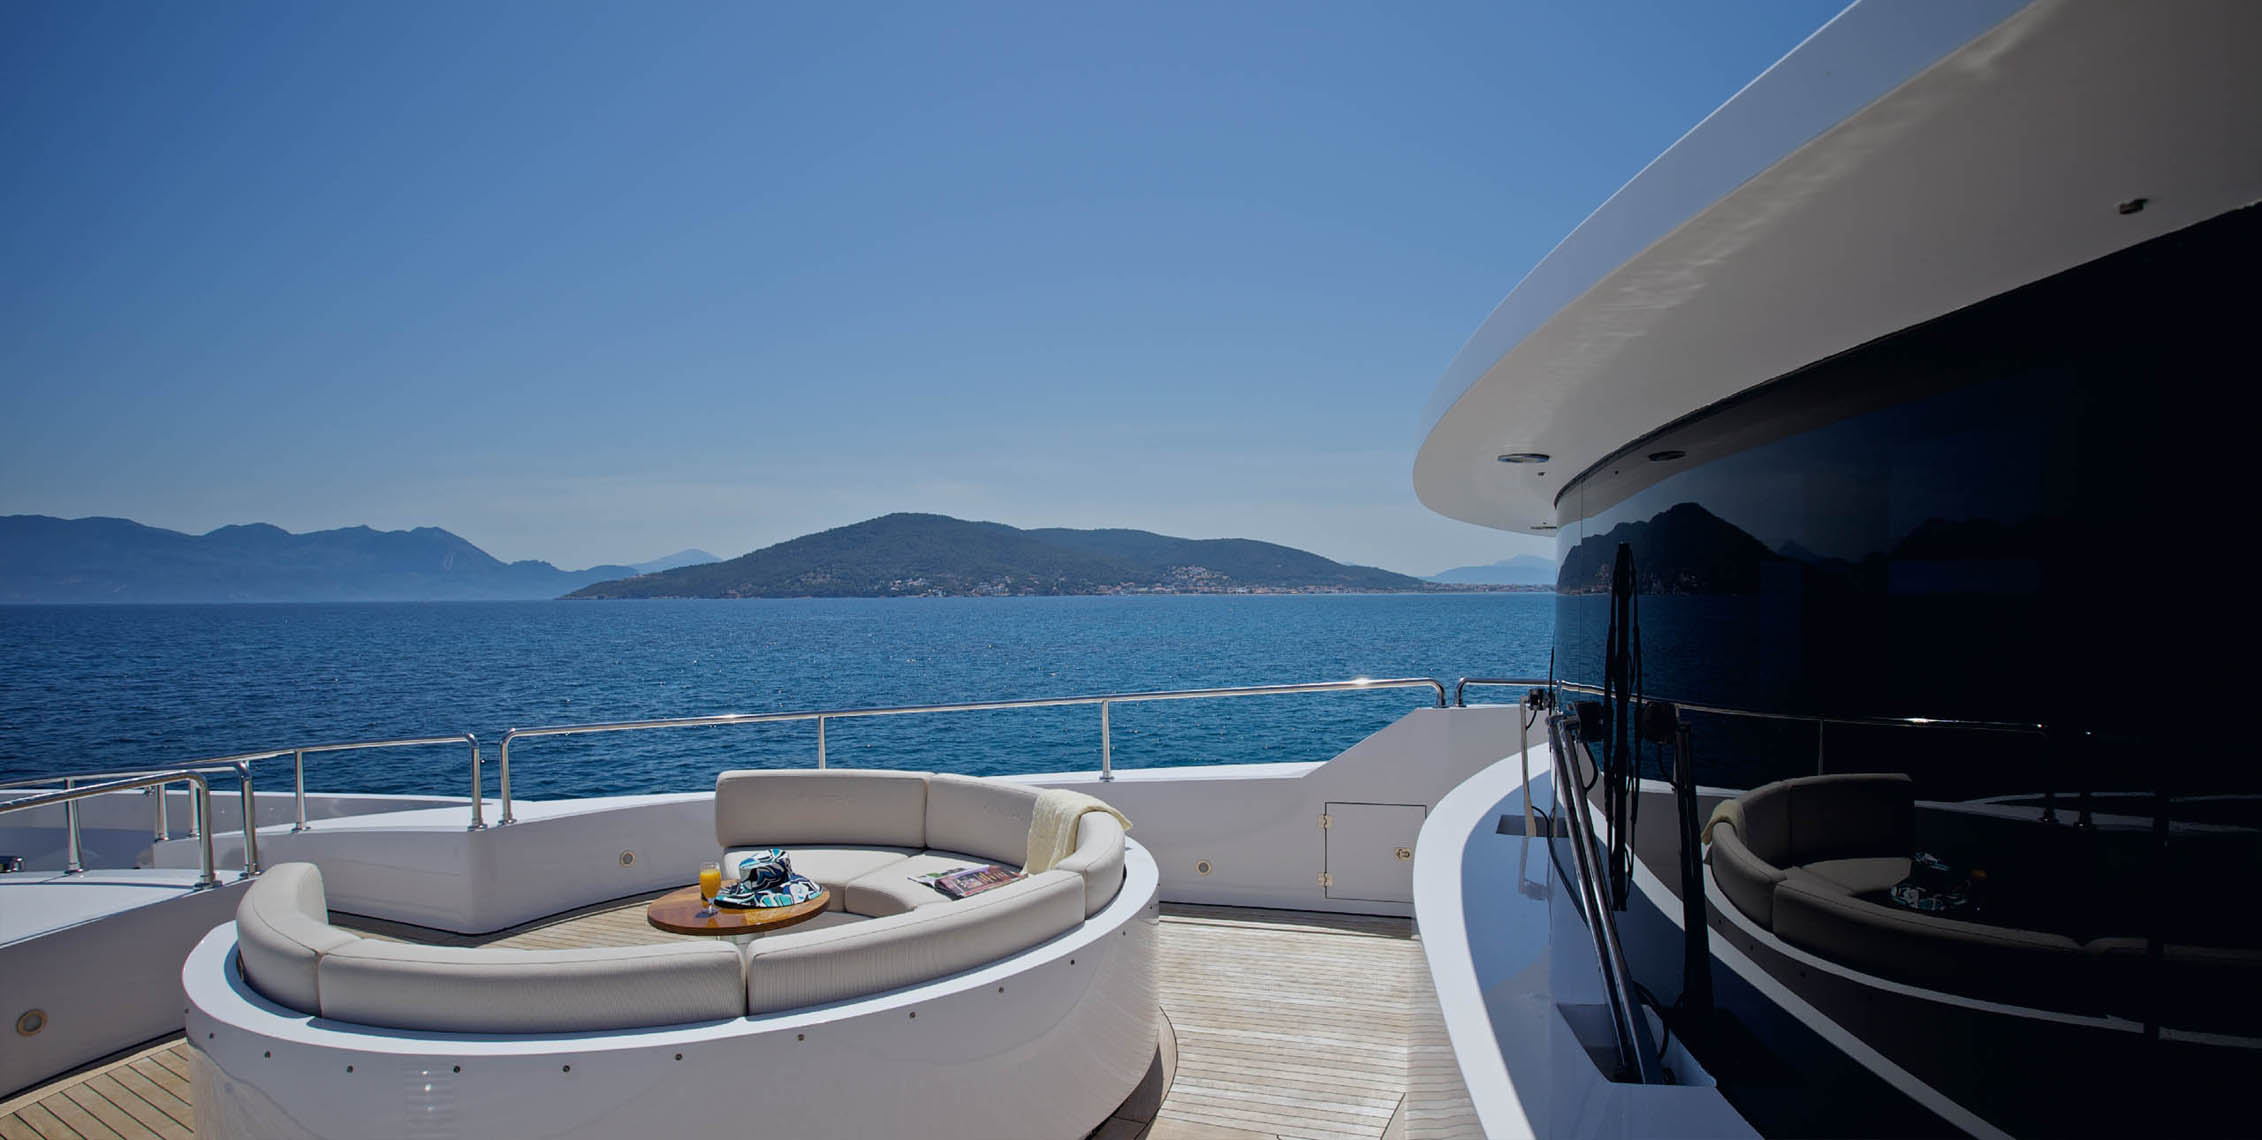 work on a yacht in greece